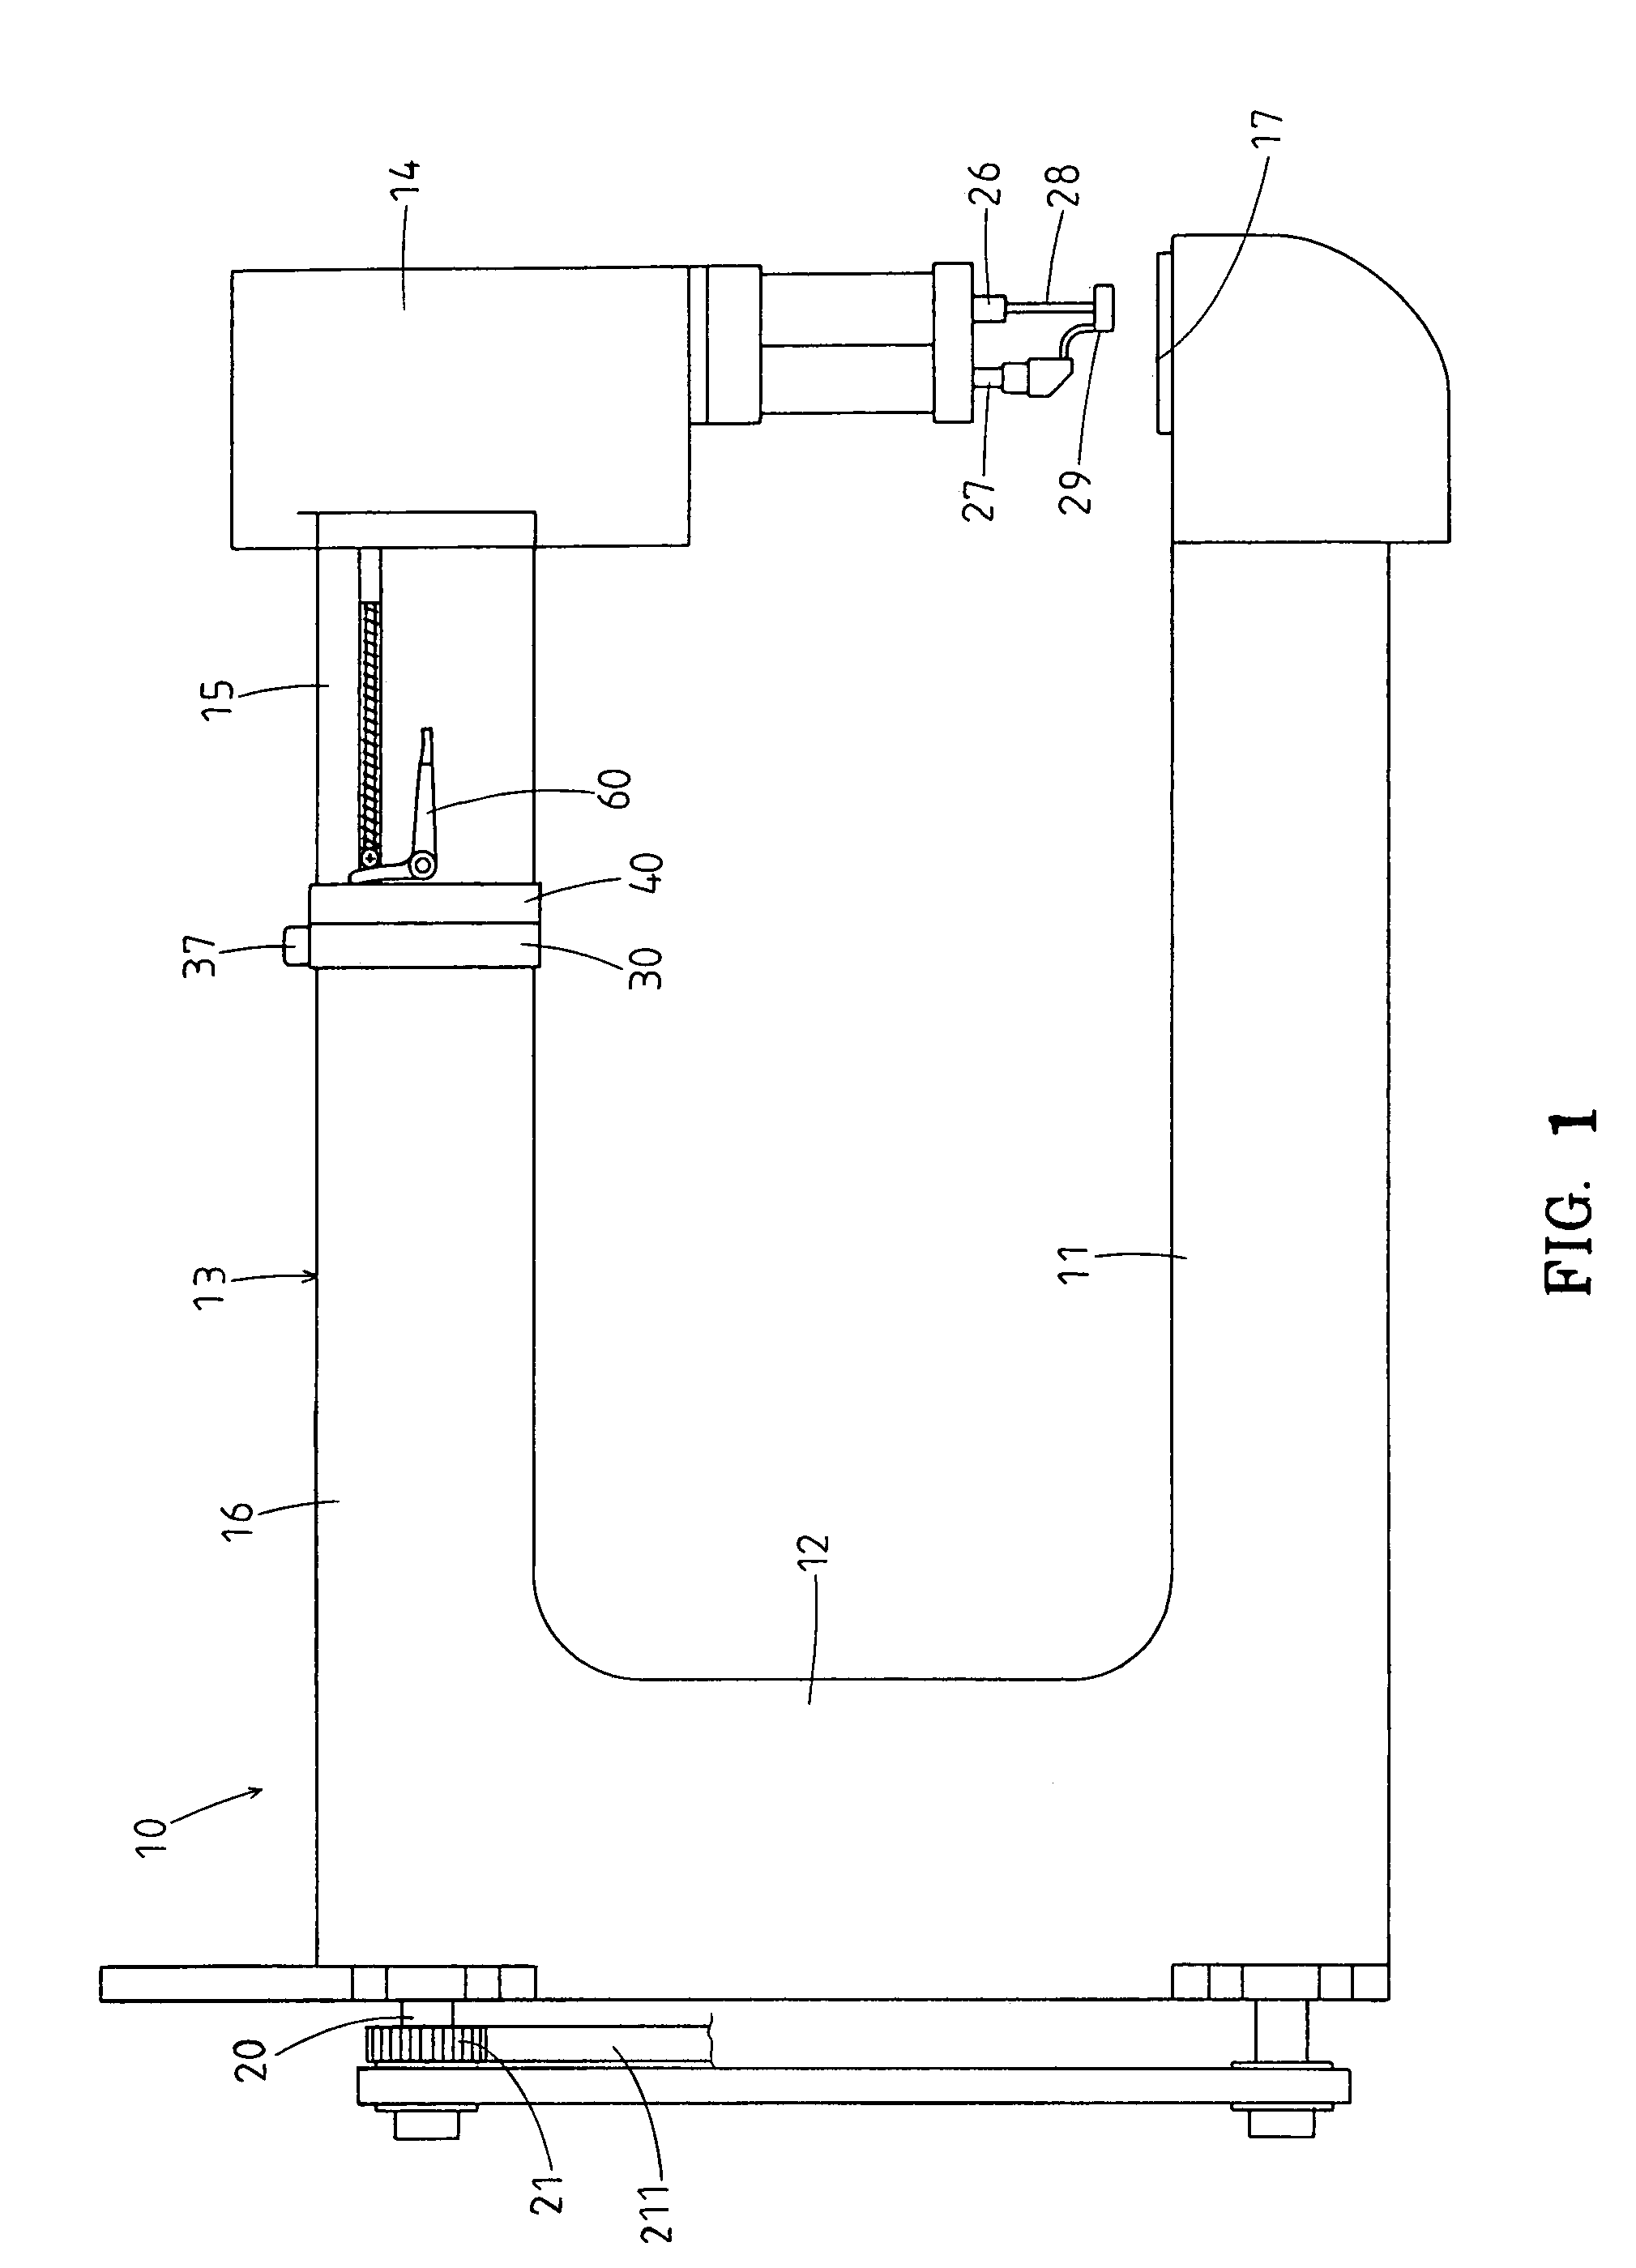 Adjustable positioning device for head of sewing machine